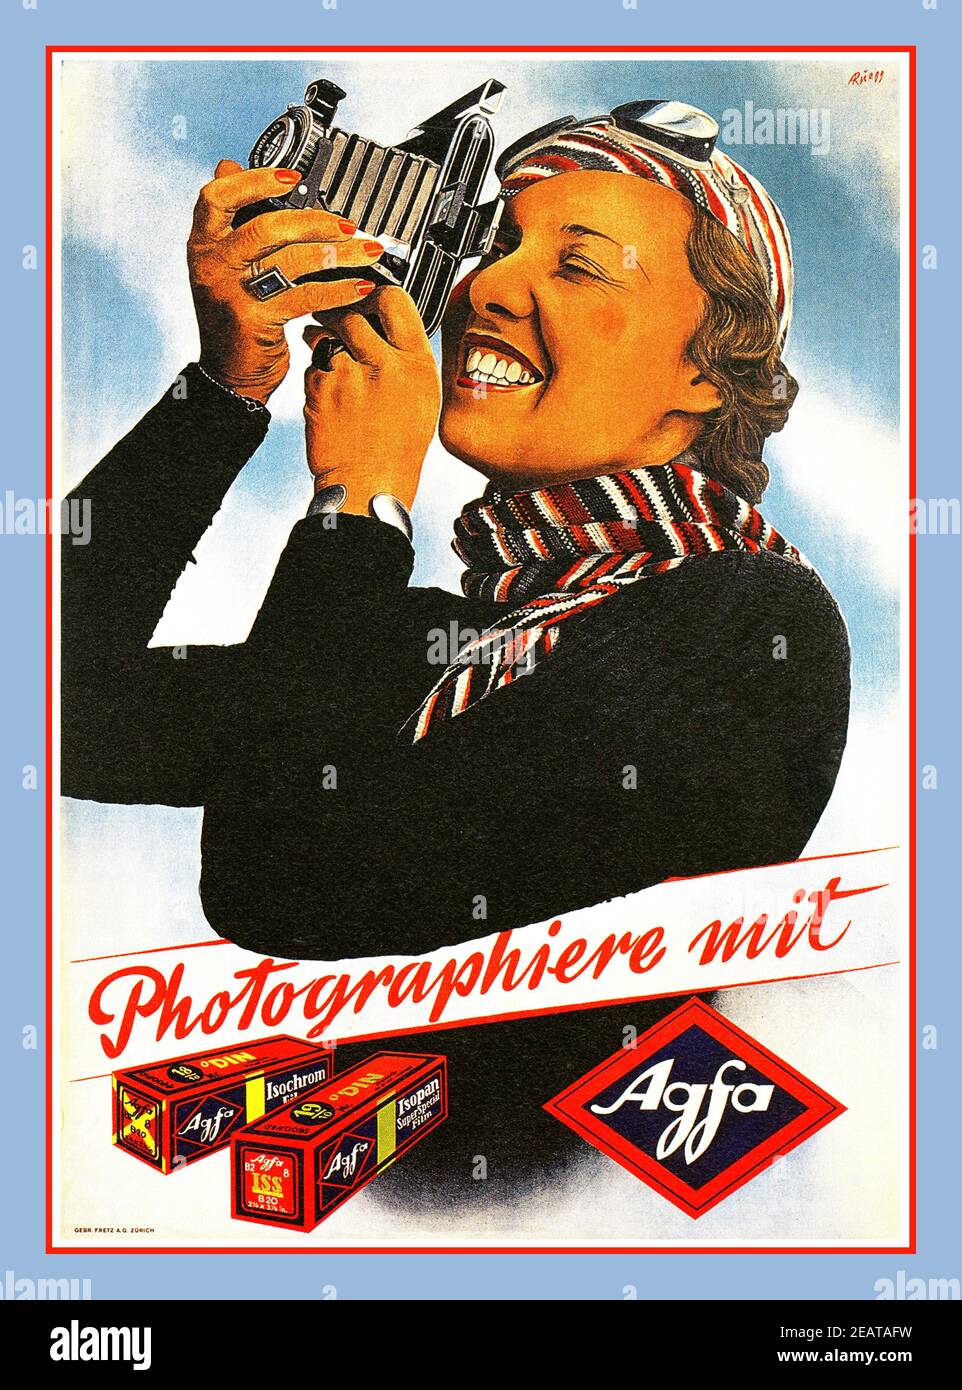 AGFA Vintage 1930's Agfa Film and Camera Advertisement Poster by artist Albert Rüegg featuring an attractive stylish lady holding an Agfa roll film bellows camera.  'PHOTOGRAPHIERE mit Agfa', a high quality West German photographic manufacturing company (very popular in the 1930s-1980's) Germany 1937 Stock Photo